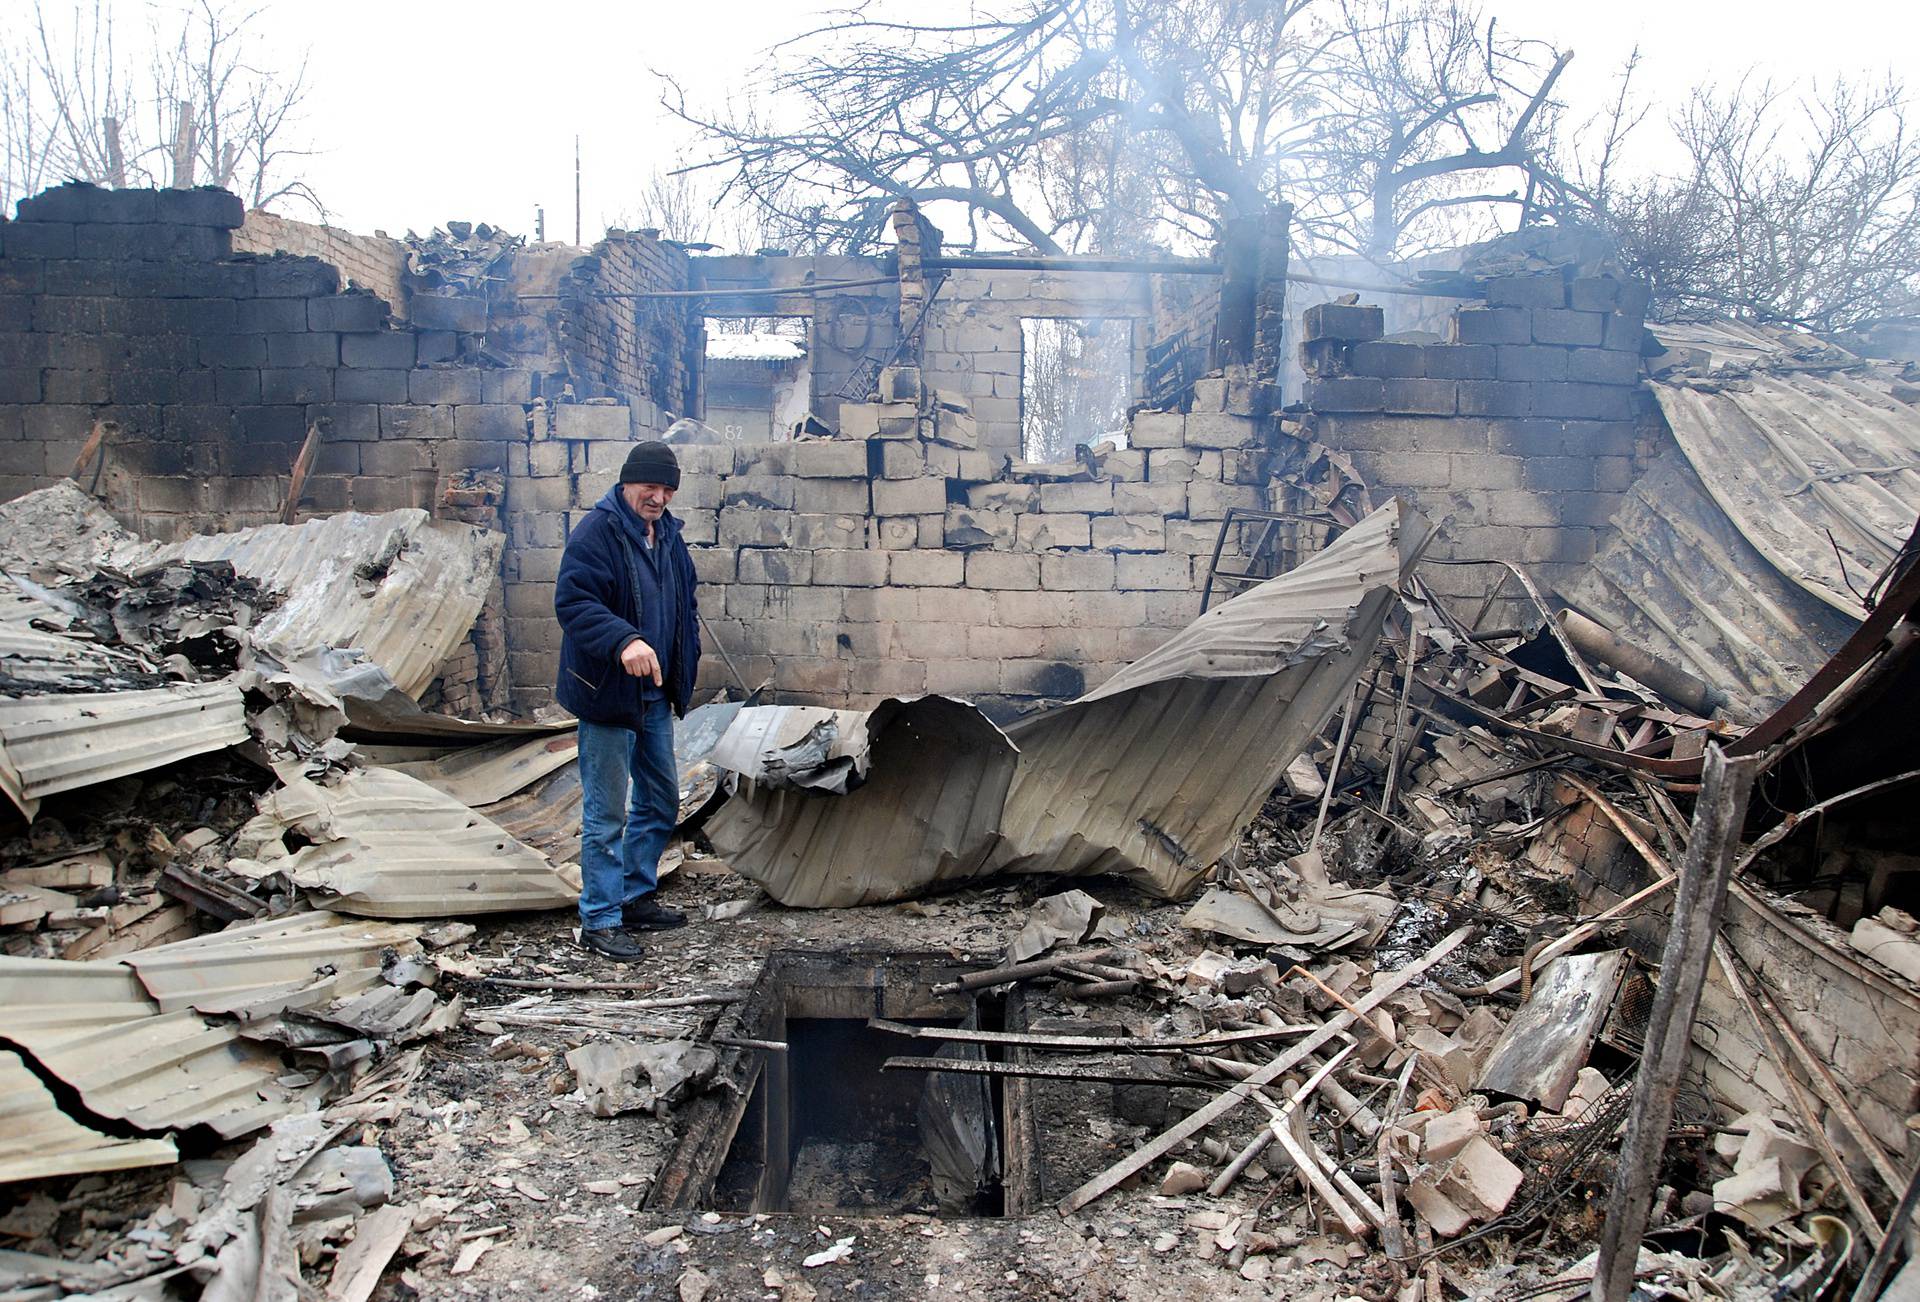 A man stands on the rubble of a house destroyed by recent shelling during Ukraine-Russia conflict in Kharkiv